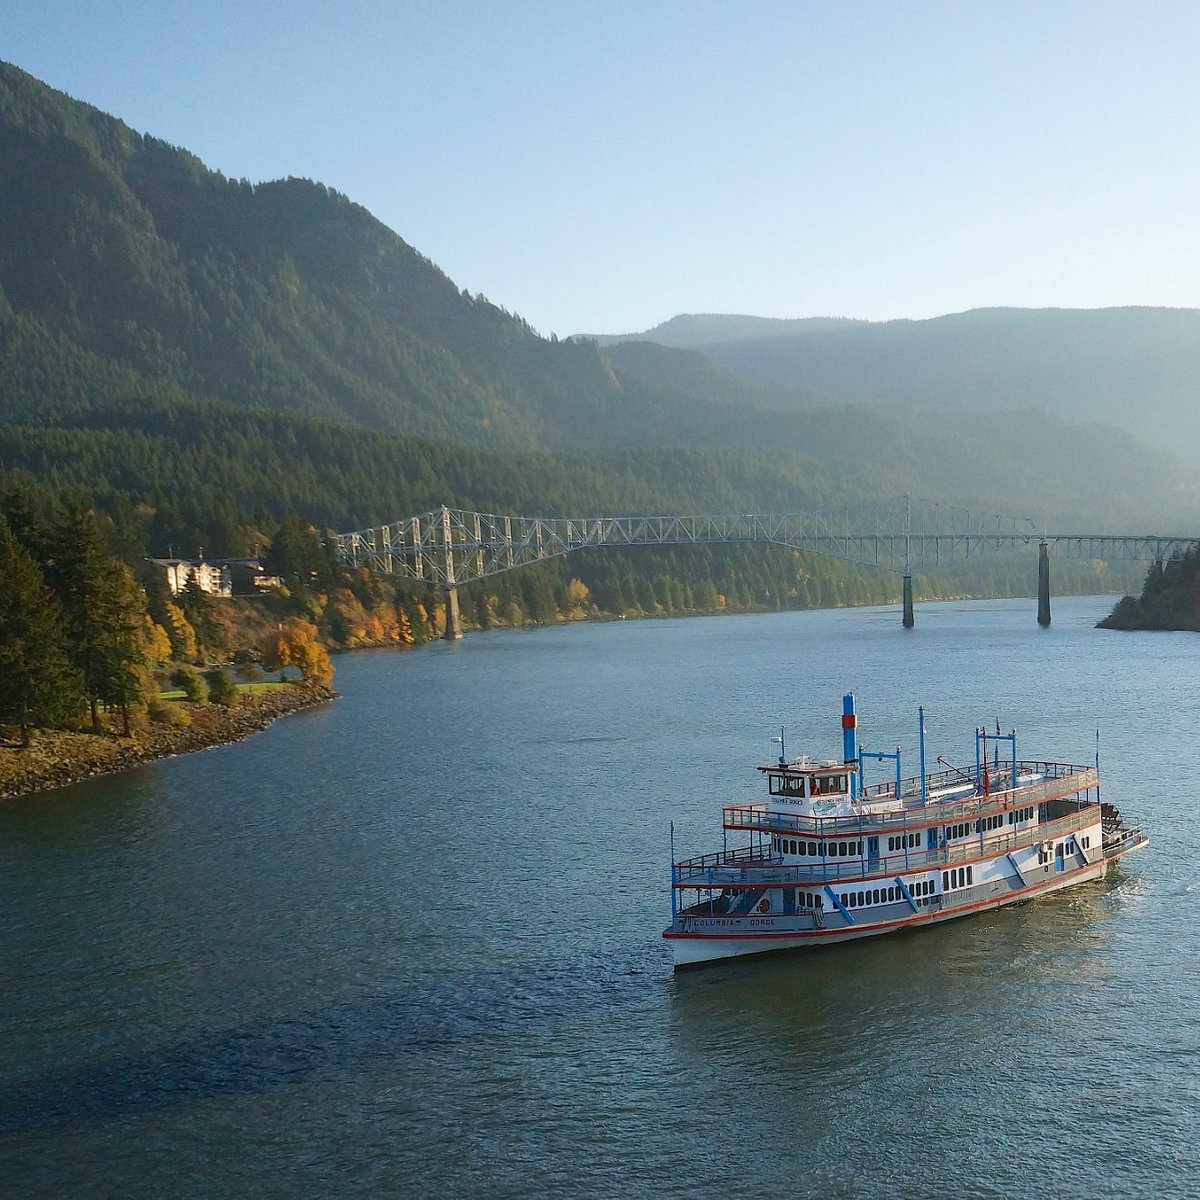 Columbia Gorge Sternwheeler Dining & Sightseeing Cruises - All You